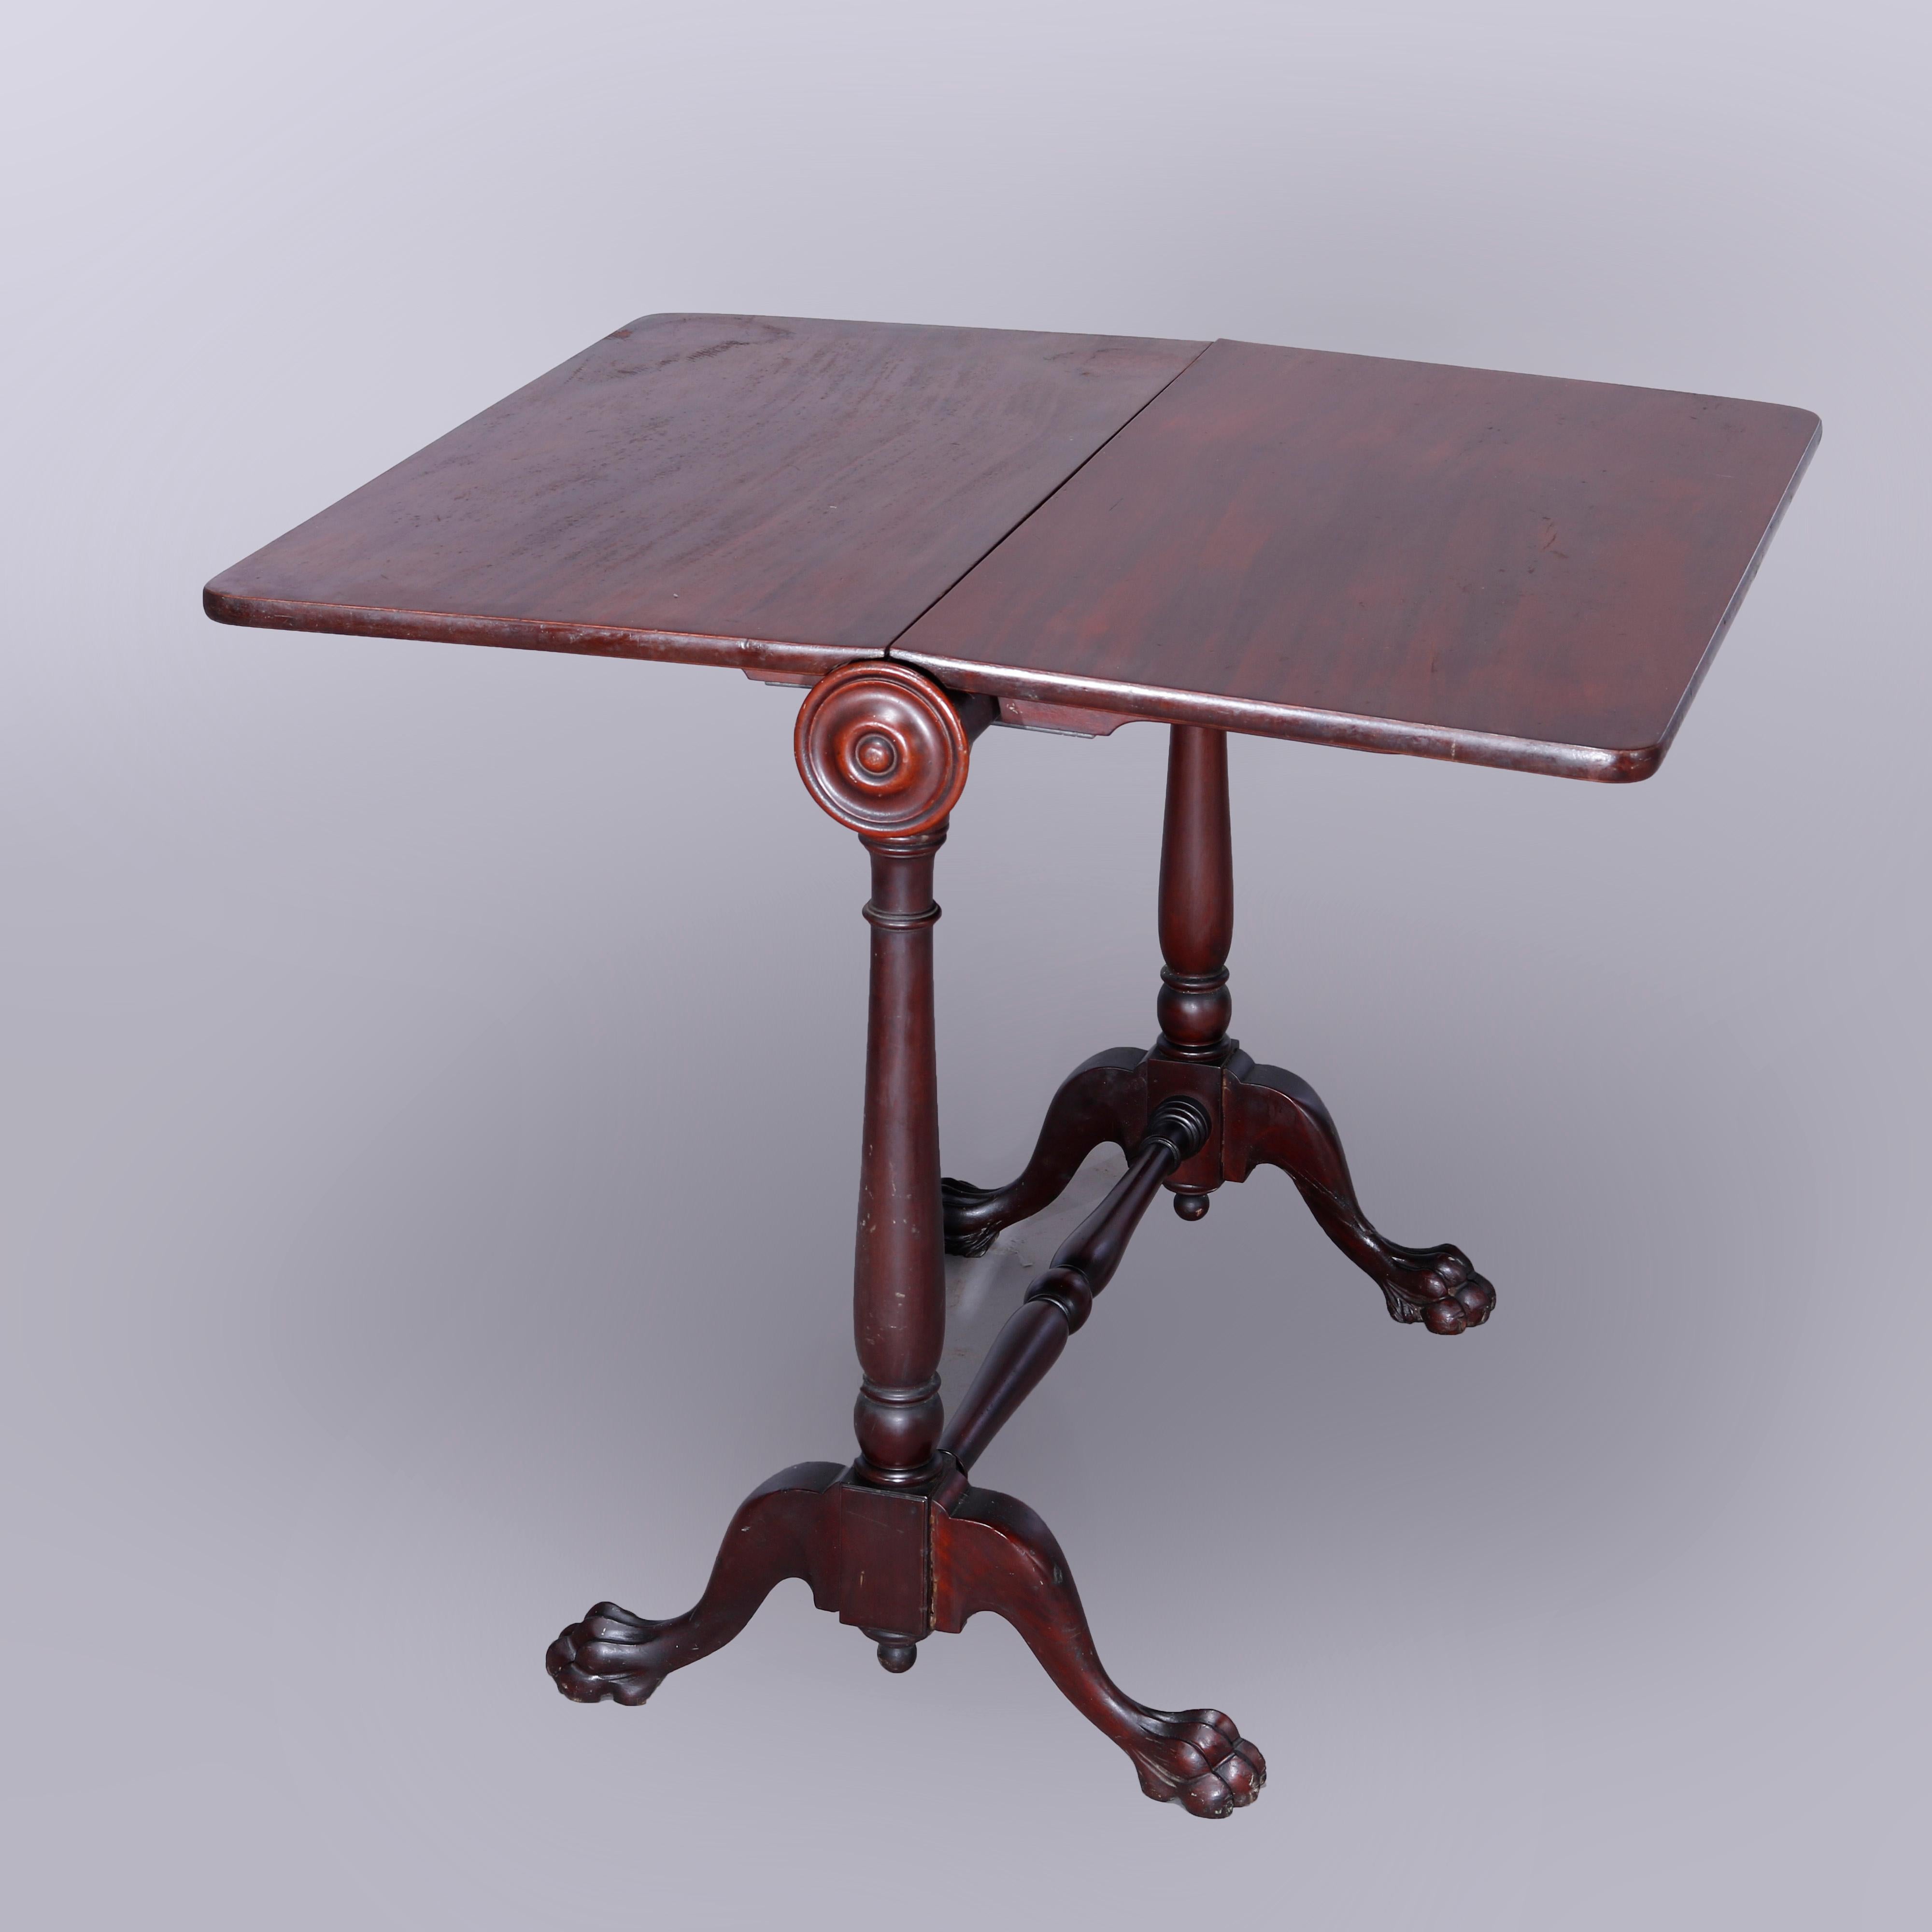 American Antique Empire Carved Mahogany Claw Foot Napkin Fold Drop Leaf Table, c1890